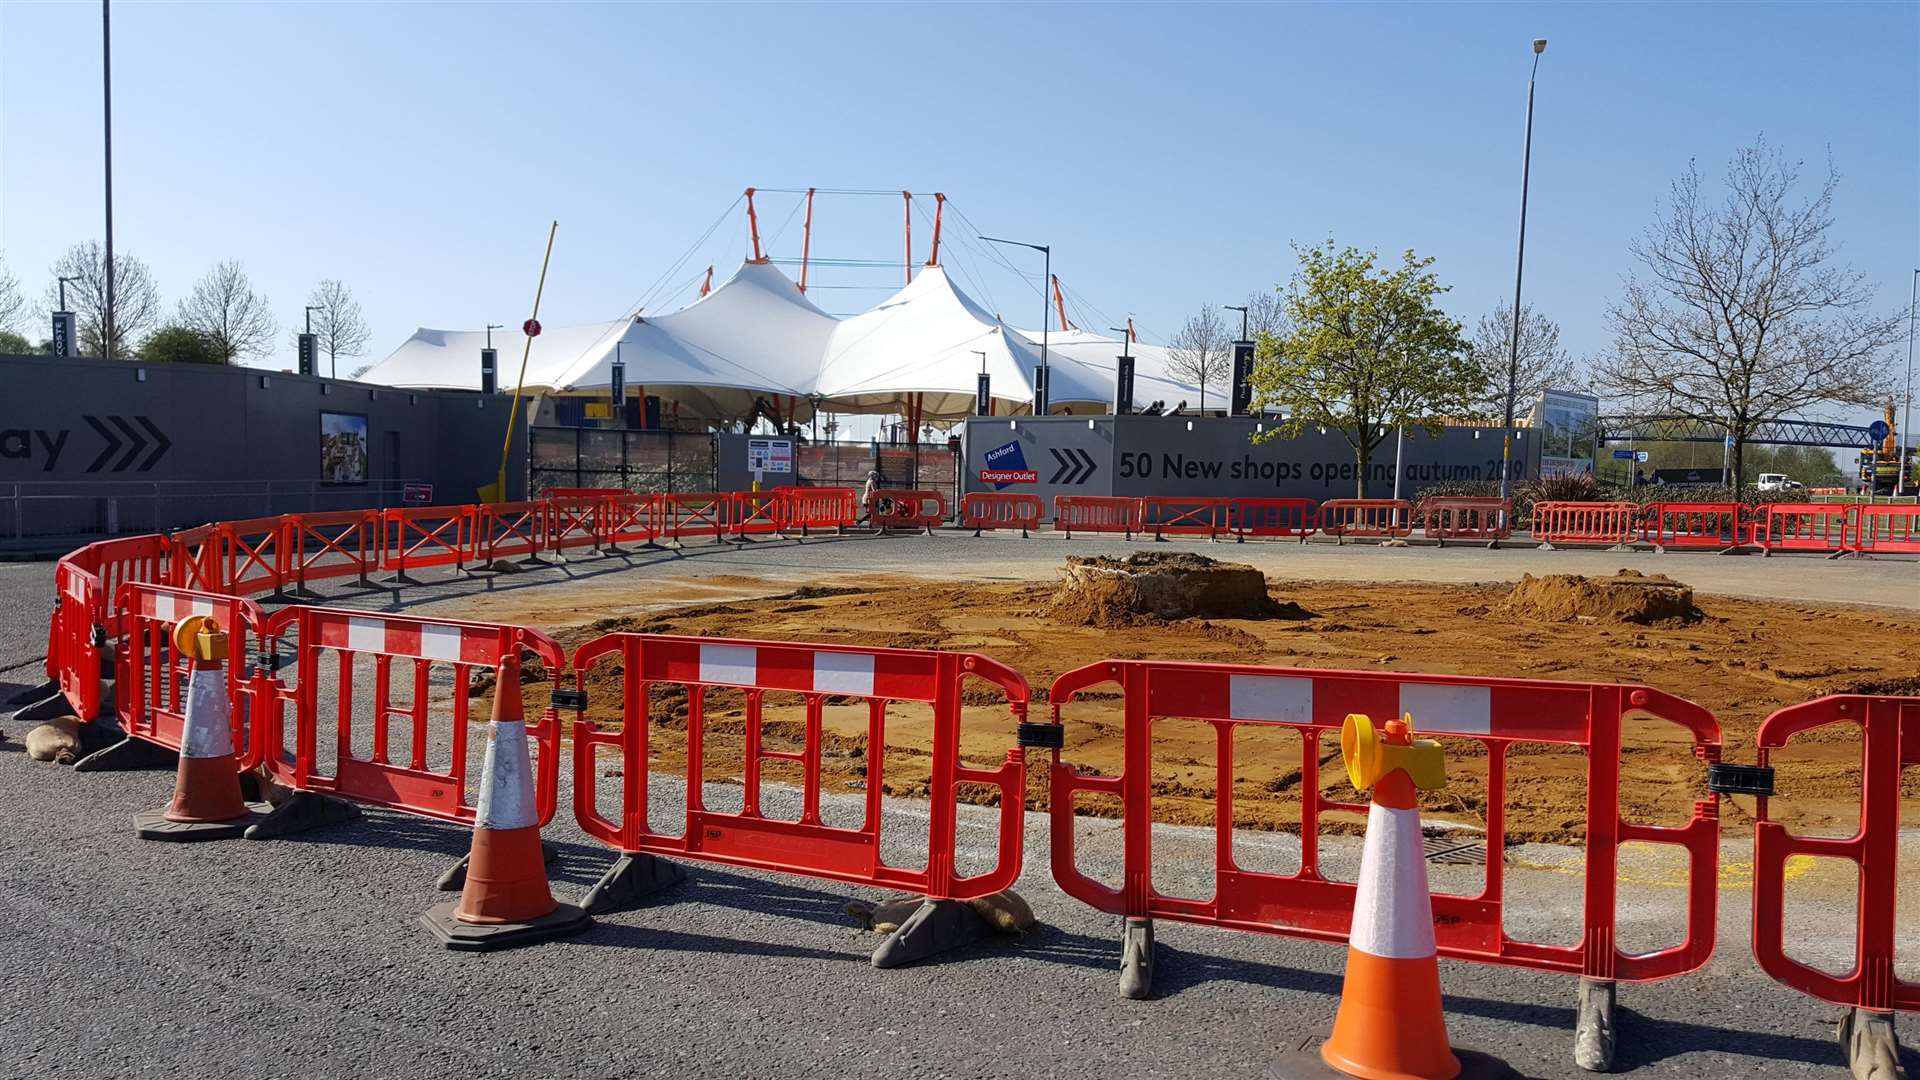 The Designer Outlet is expanding